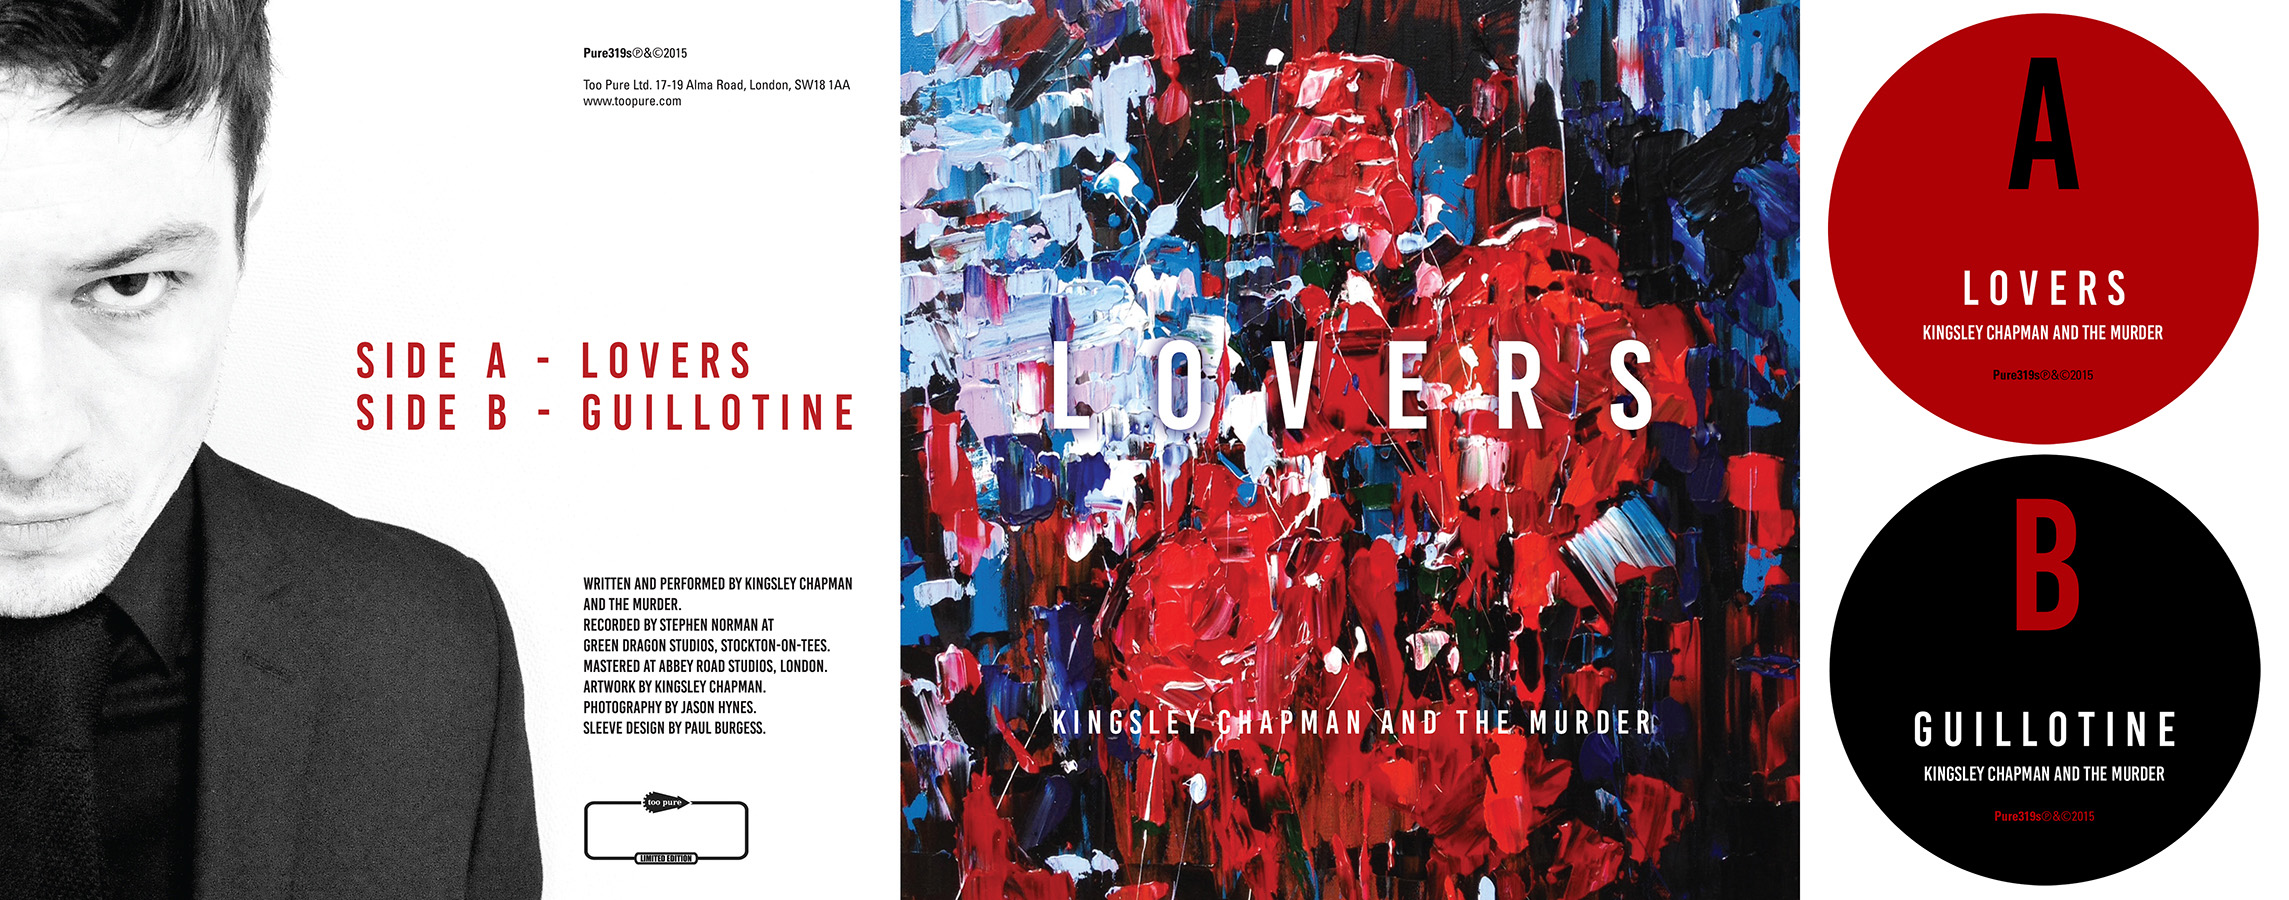 Sleeve/label artwork for 'Lovers/Guillotine' by Kingsley Chapman and the Murder.